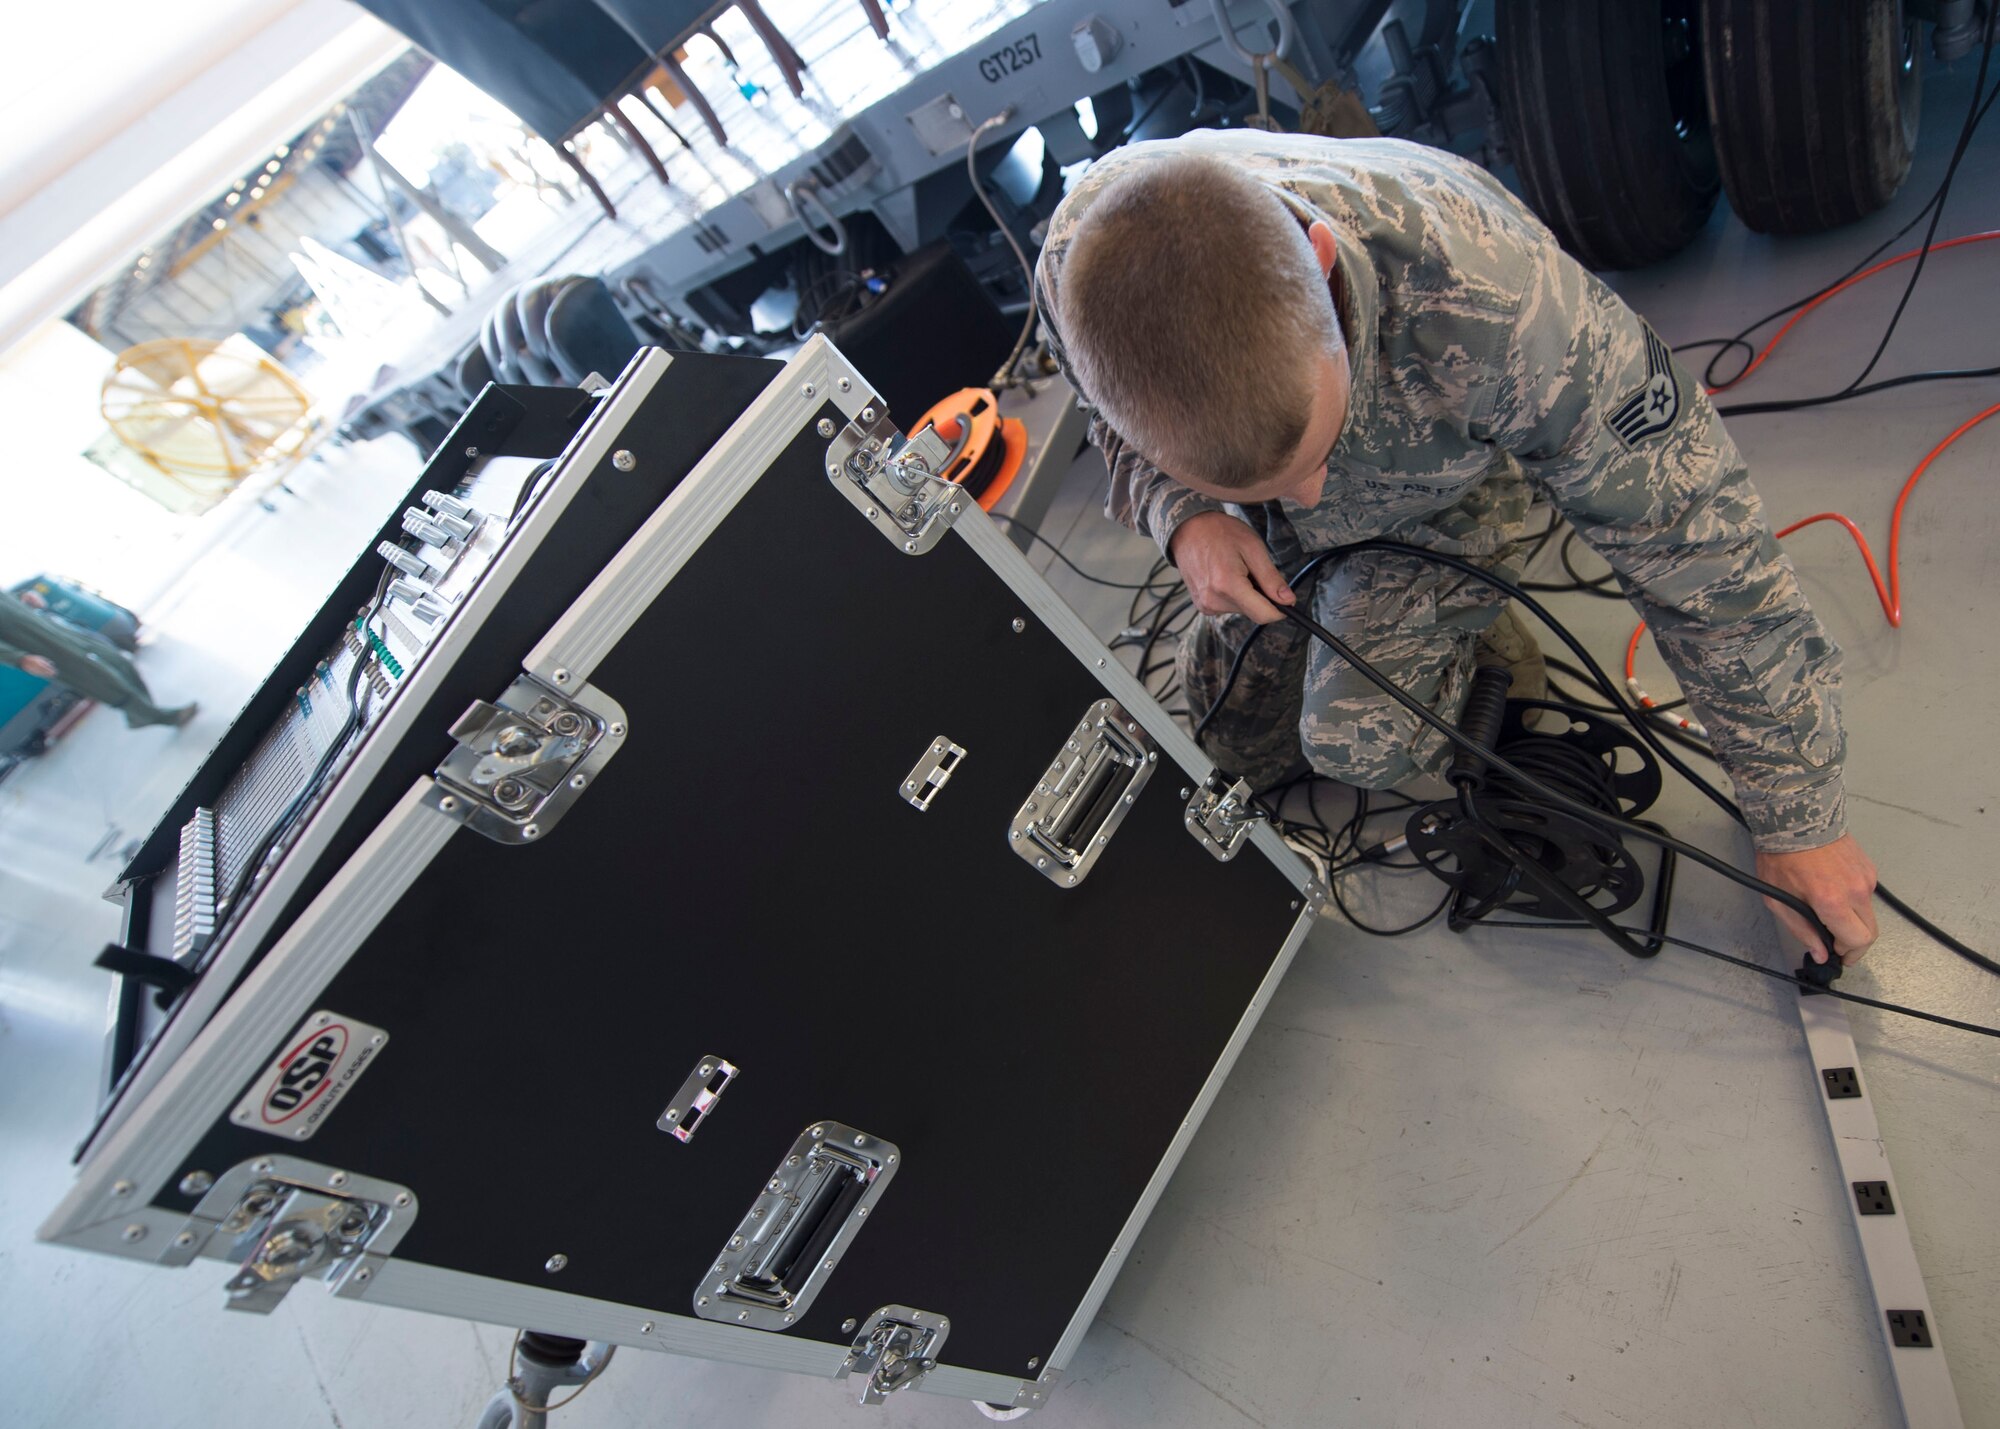 Staff Sgt. Andrew Muhlhahn, a radio frequency systems journeyman with the 1st Special Operations Communications Squadron, sets up audio equipment for a change of command ceremony at the Freedom Hangar on Hurlburt Field, Fla., July 15, 2016. 1st SOCS Airmen provide audio support for different ceremonies and events on base. (U.S. Air Force photo by Senior Airman Krystal M. Garrett)